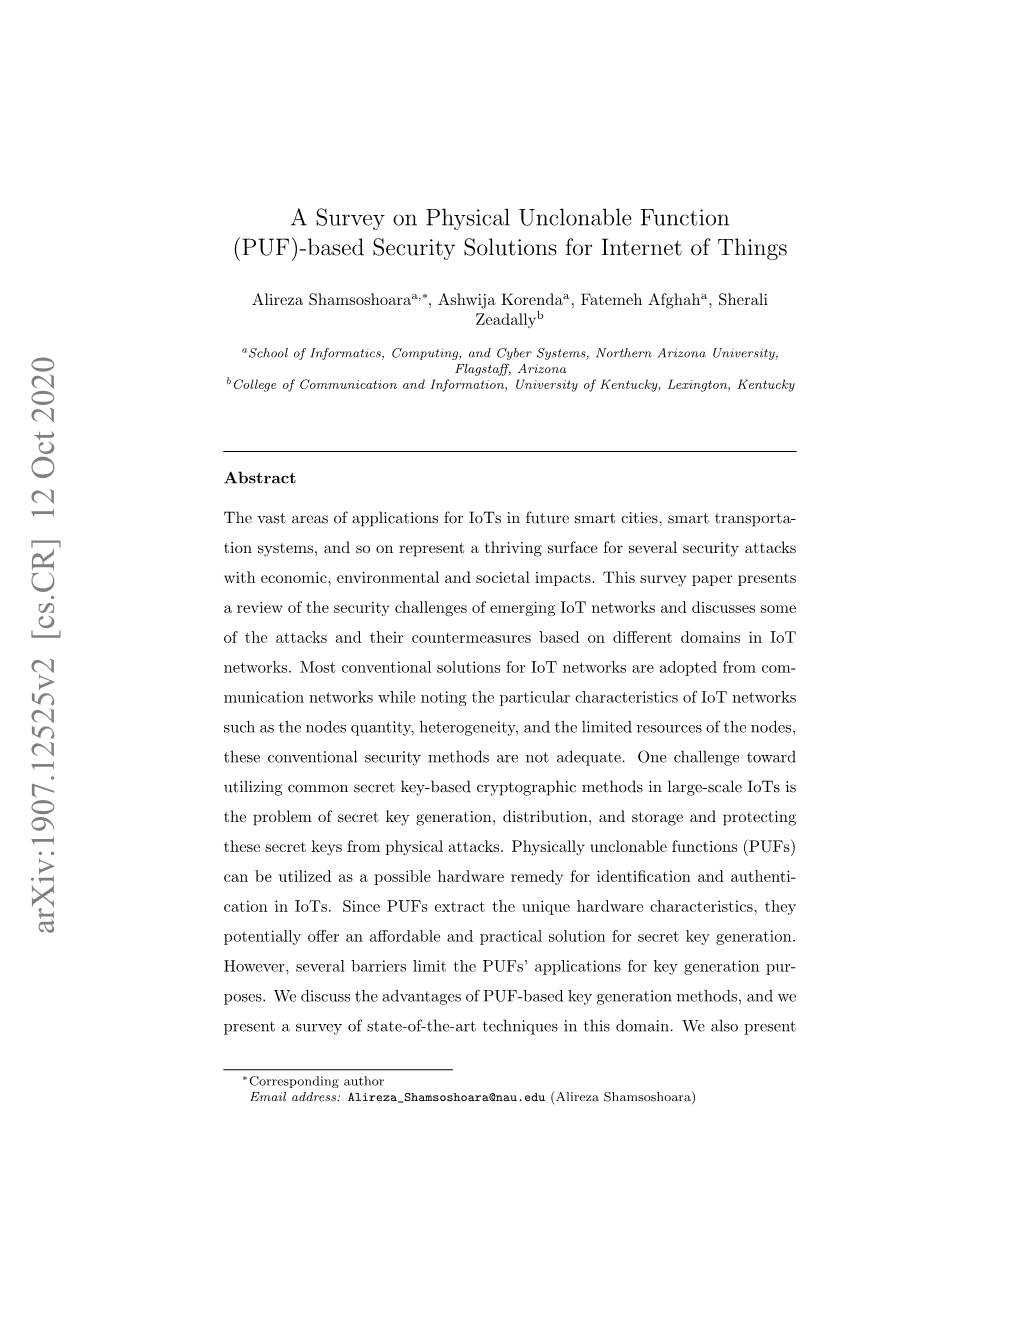 A Survey on Physical Unclonable Function (PUF)-Based Security Solutions for Internet of Things